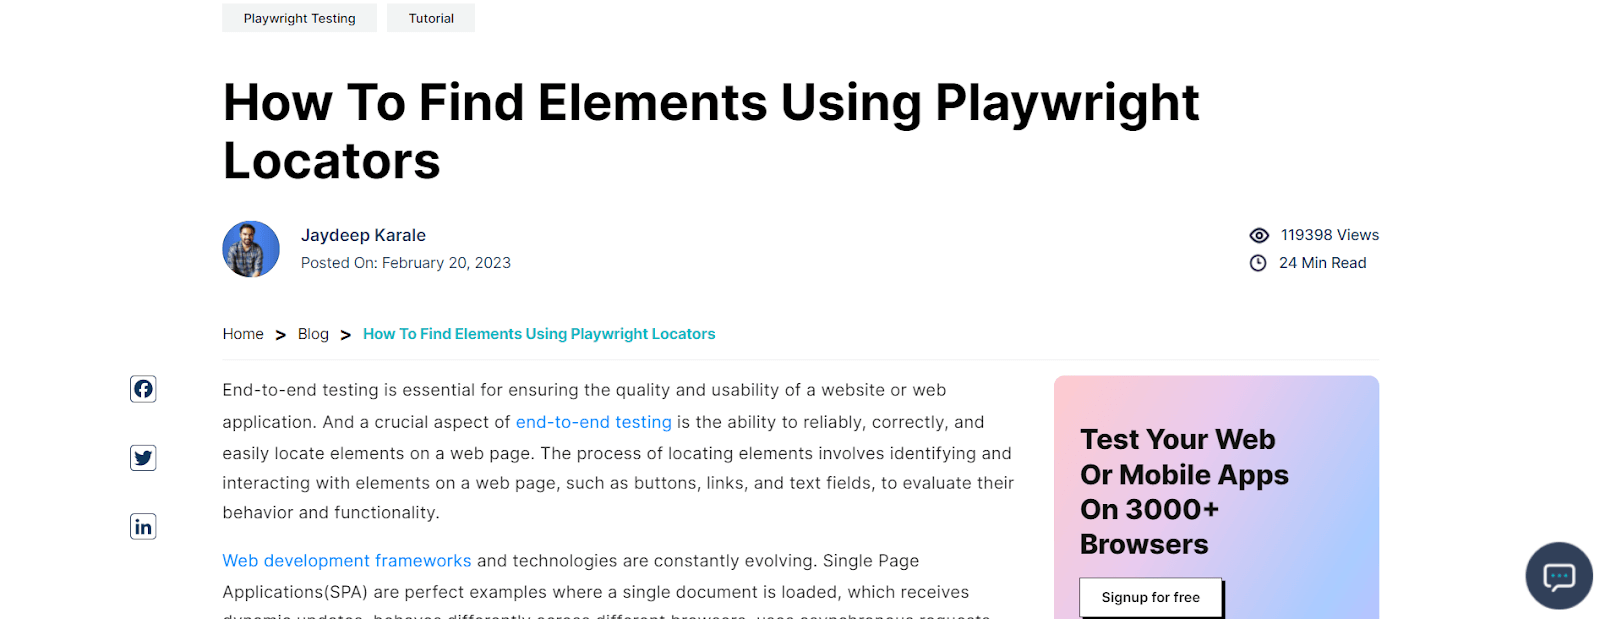 How To Find Elements Using Playwright Locators